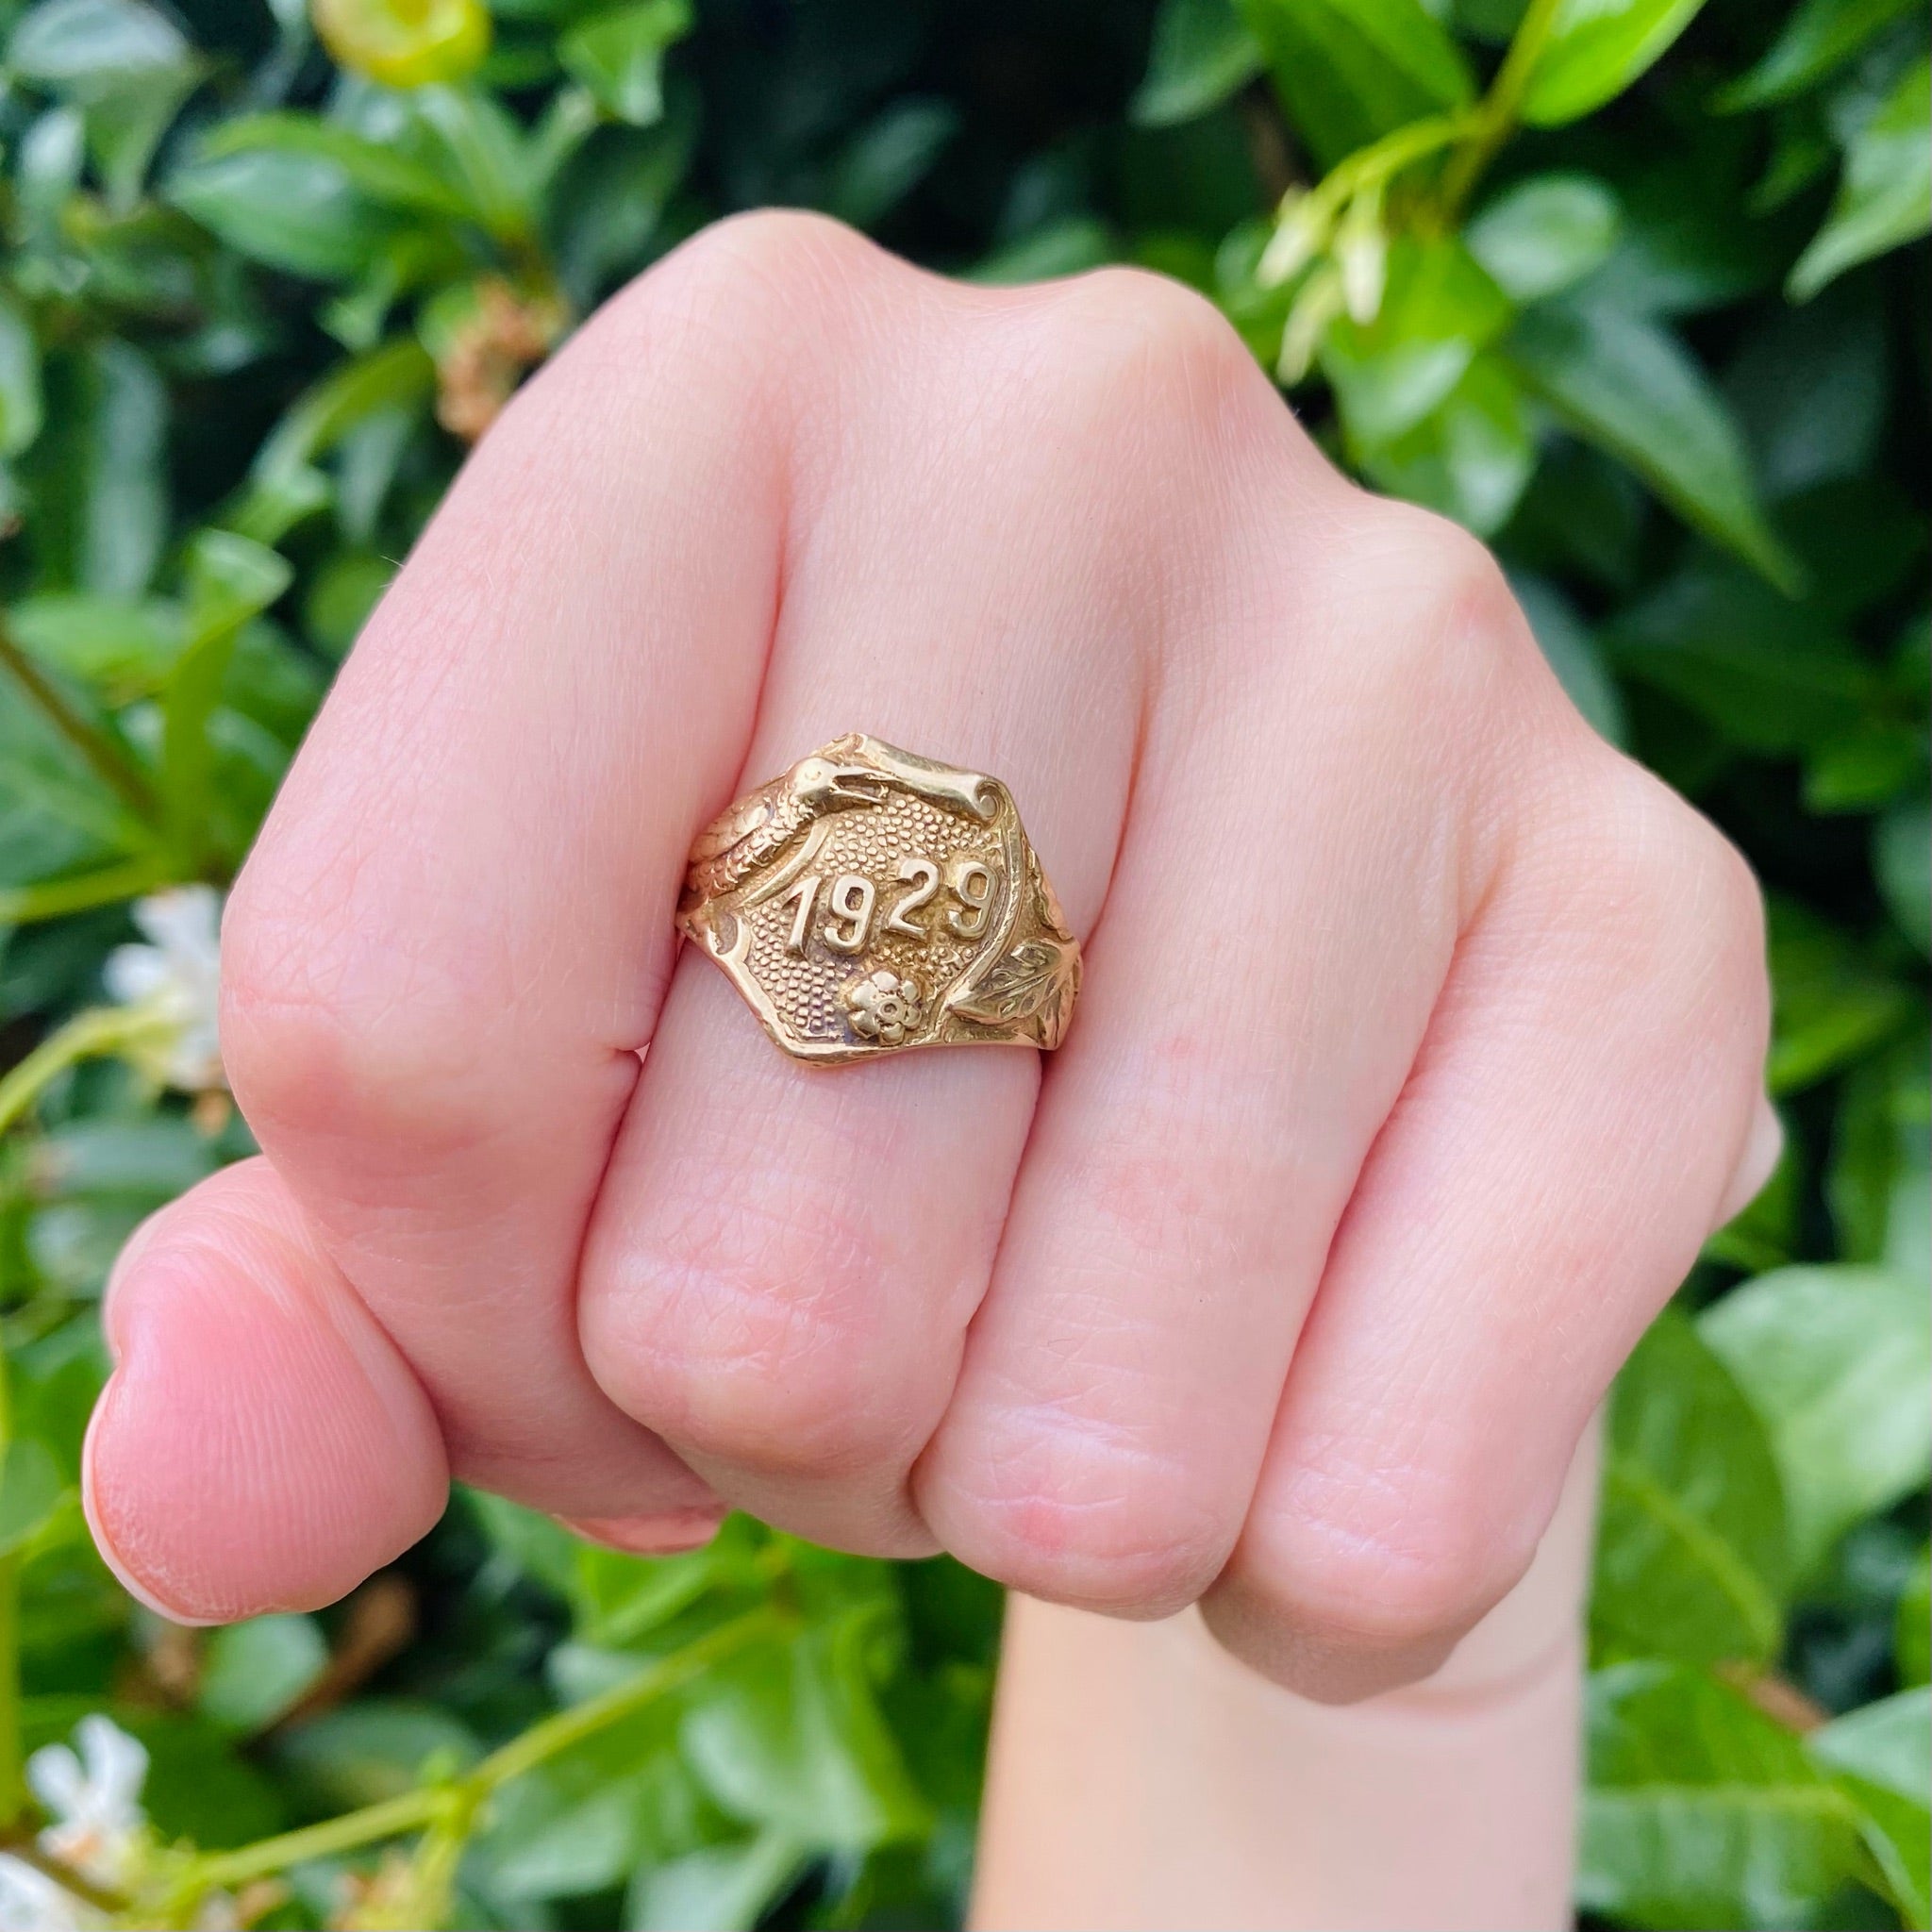 Whimsical "1929" Gold Signet Ring with Bird